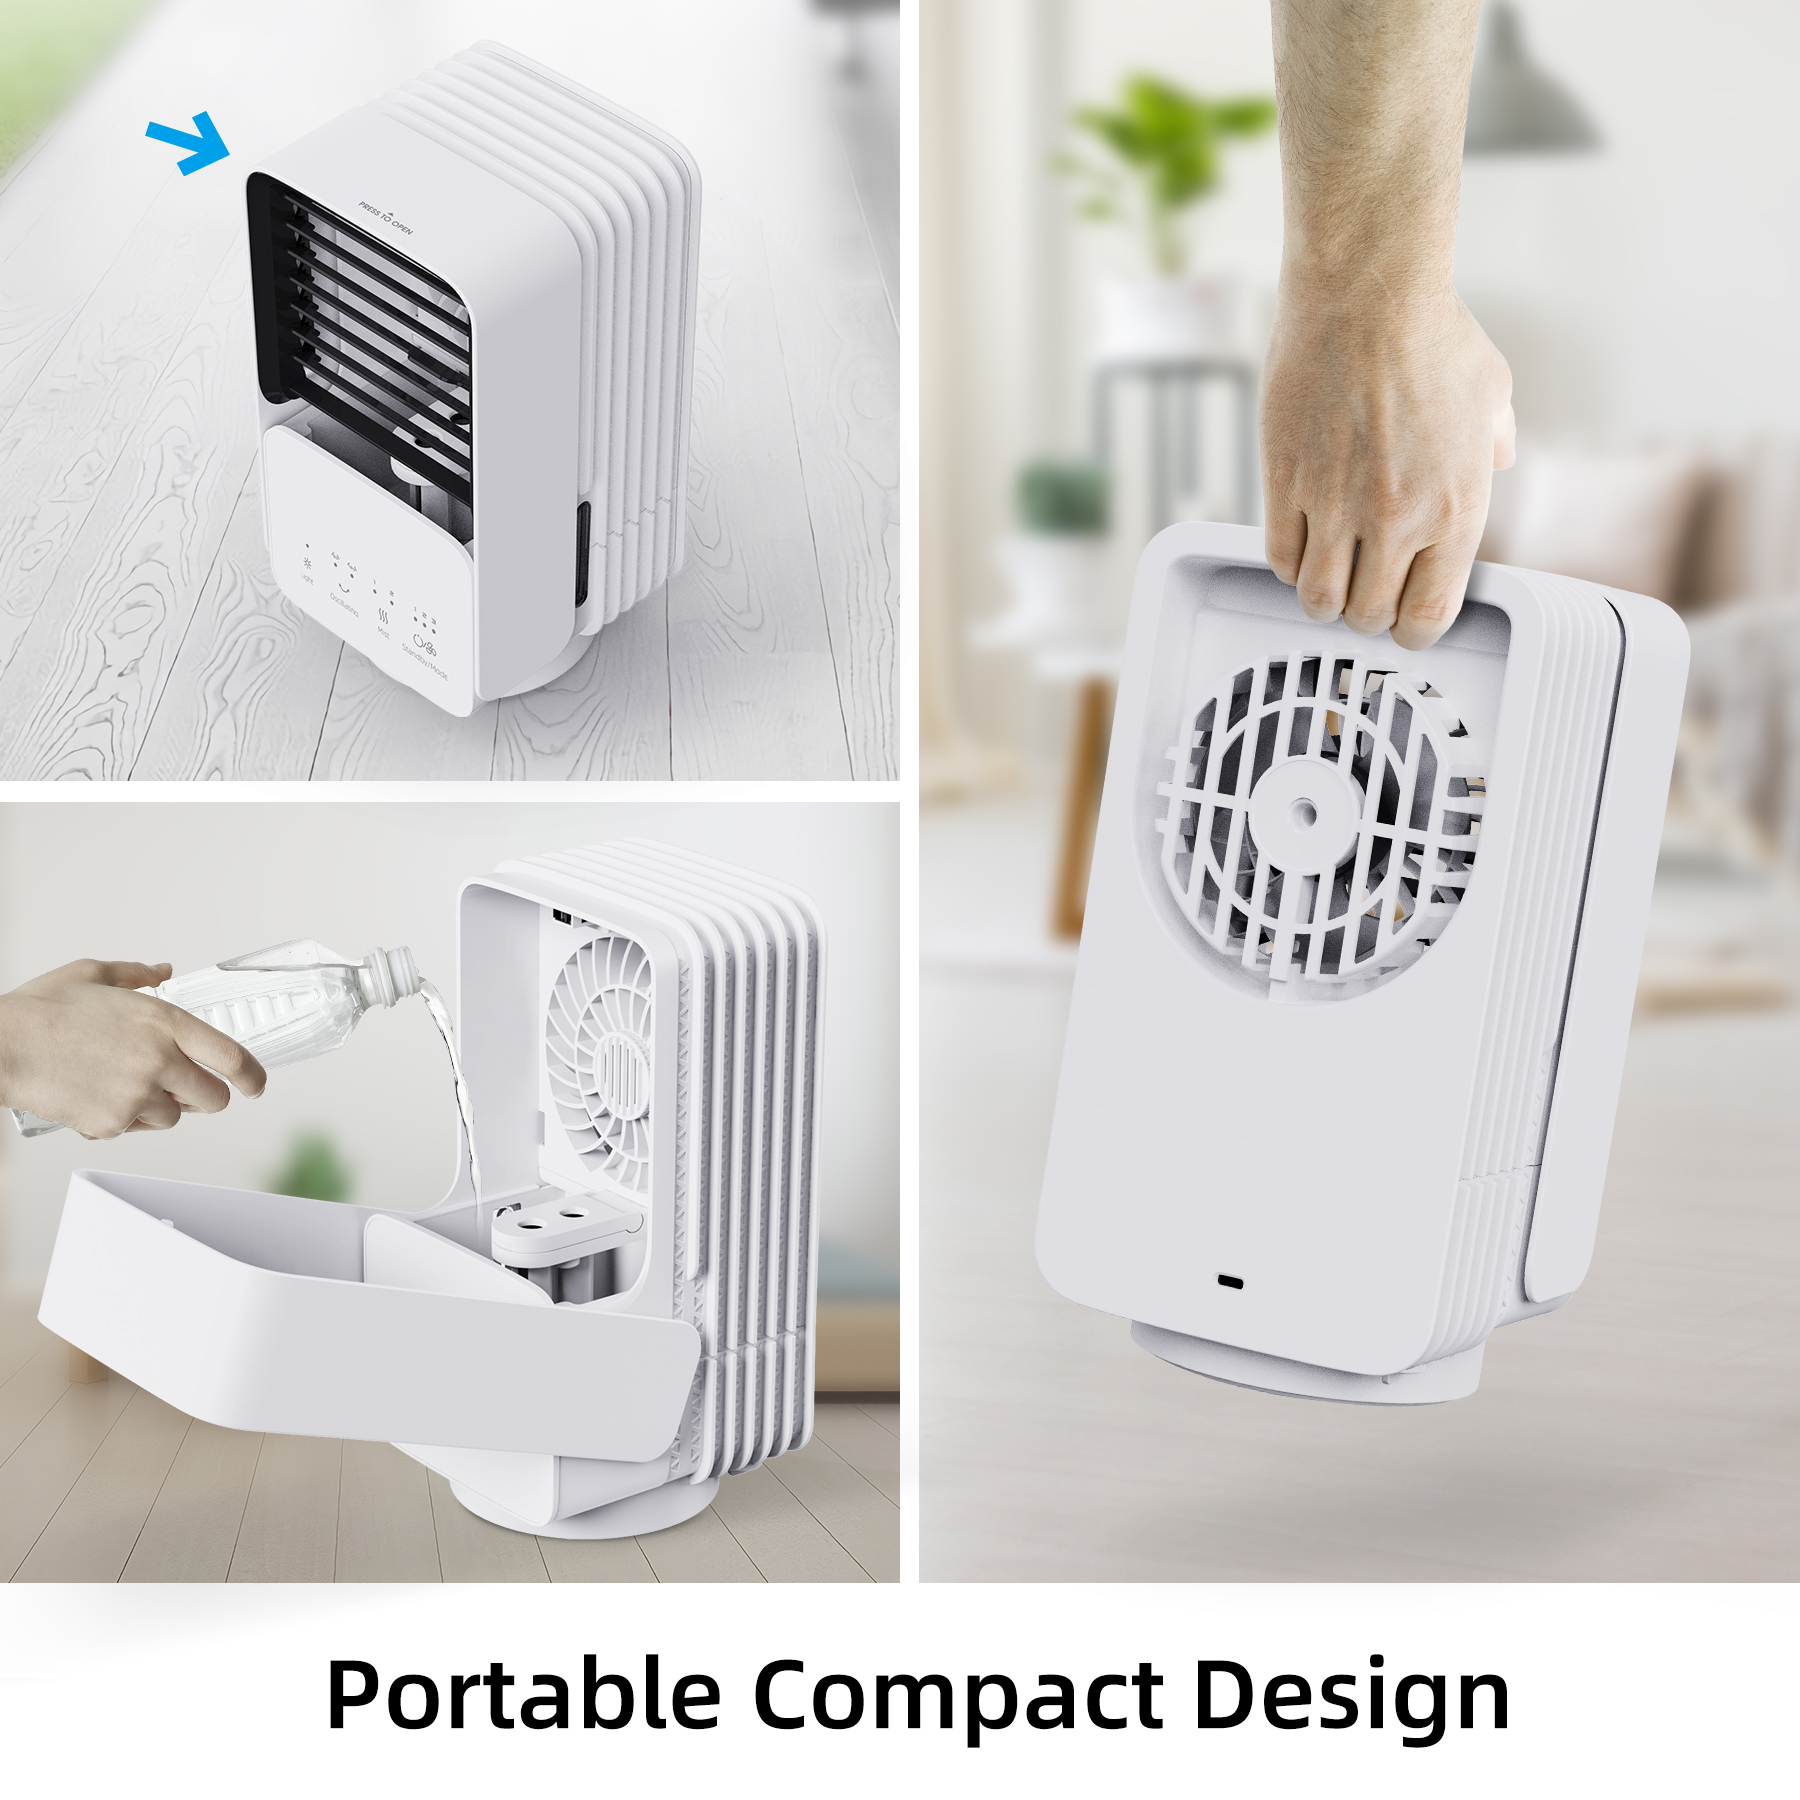 KLOUDIC Portable Air Conditioner Fan, Evaporative Air Cooler, USB Personal Desktop Cooling Fan with 3 Speeds,Small Air Cooler for Room - image 3 of 10